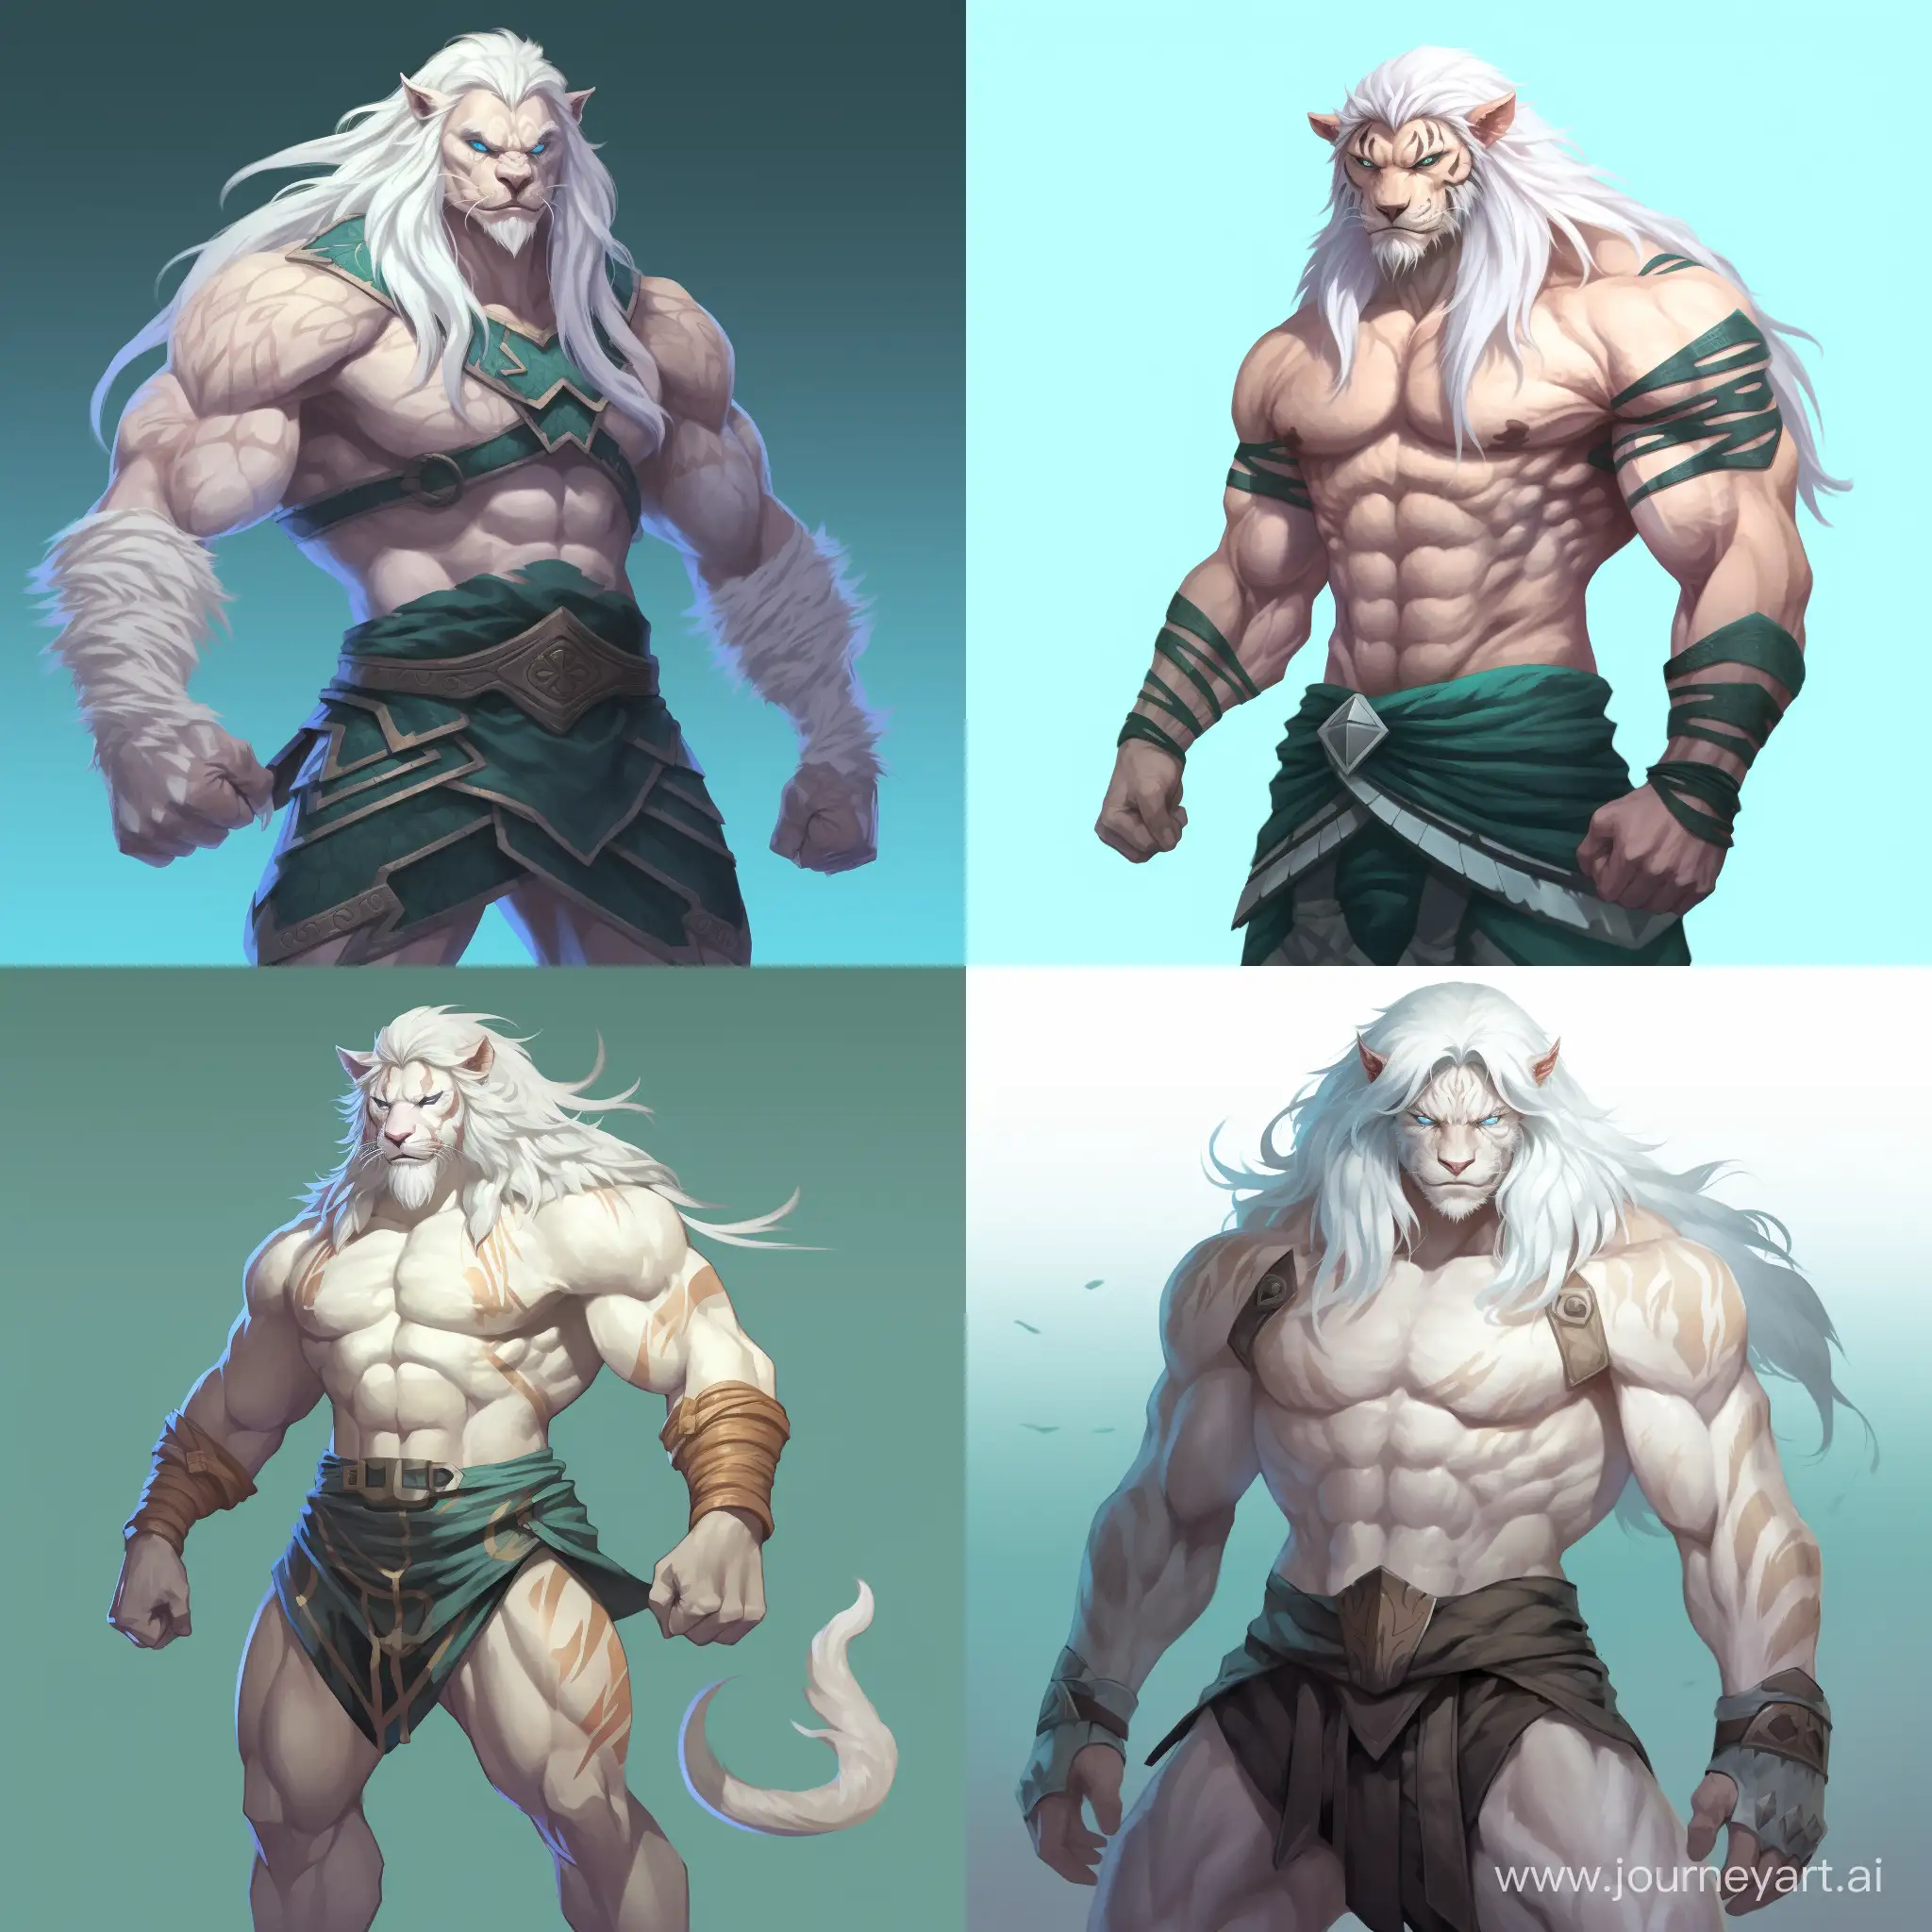 Muscular-White-Tiger-in-Cyan-Shorts-Furry-CelShaded-Beast